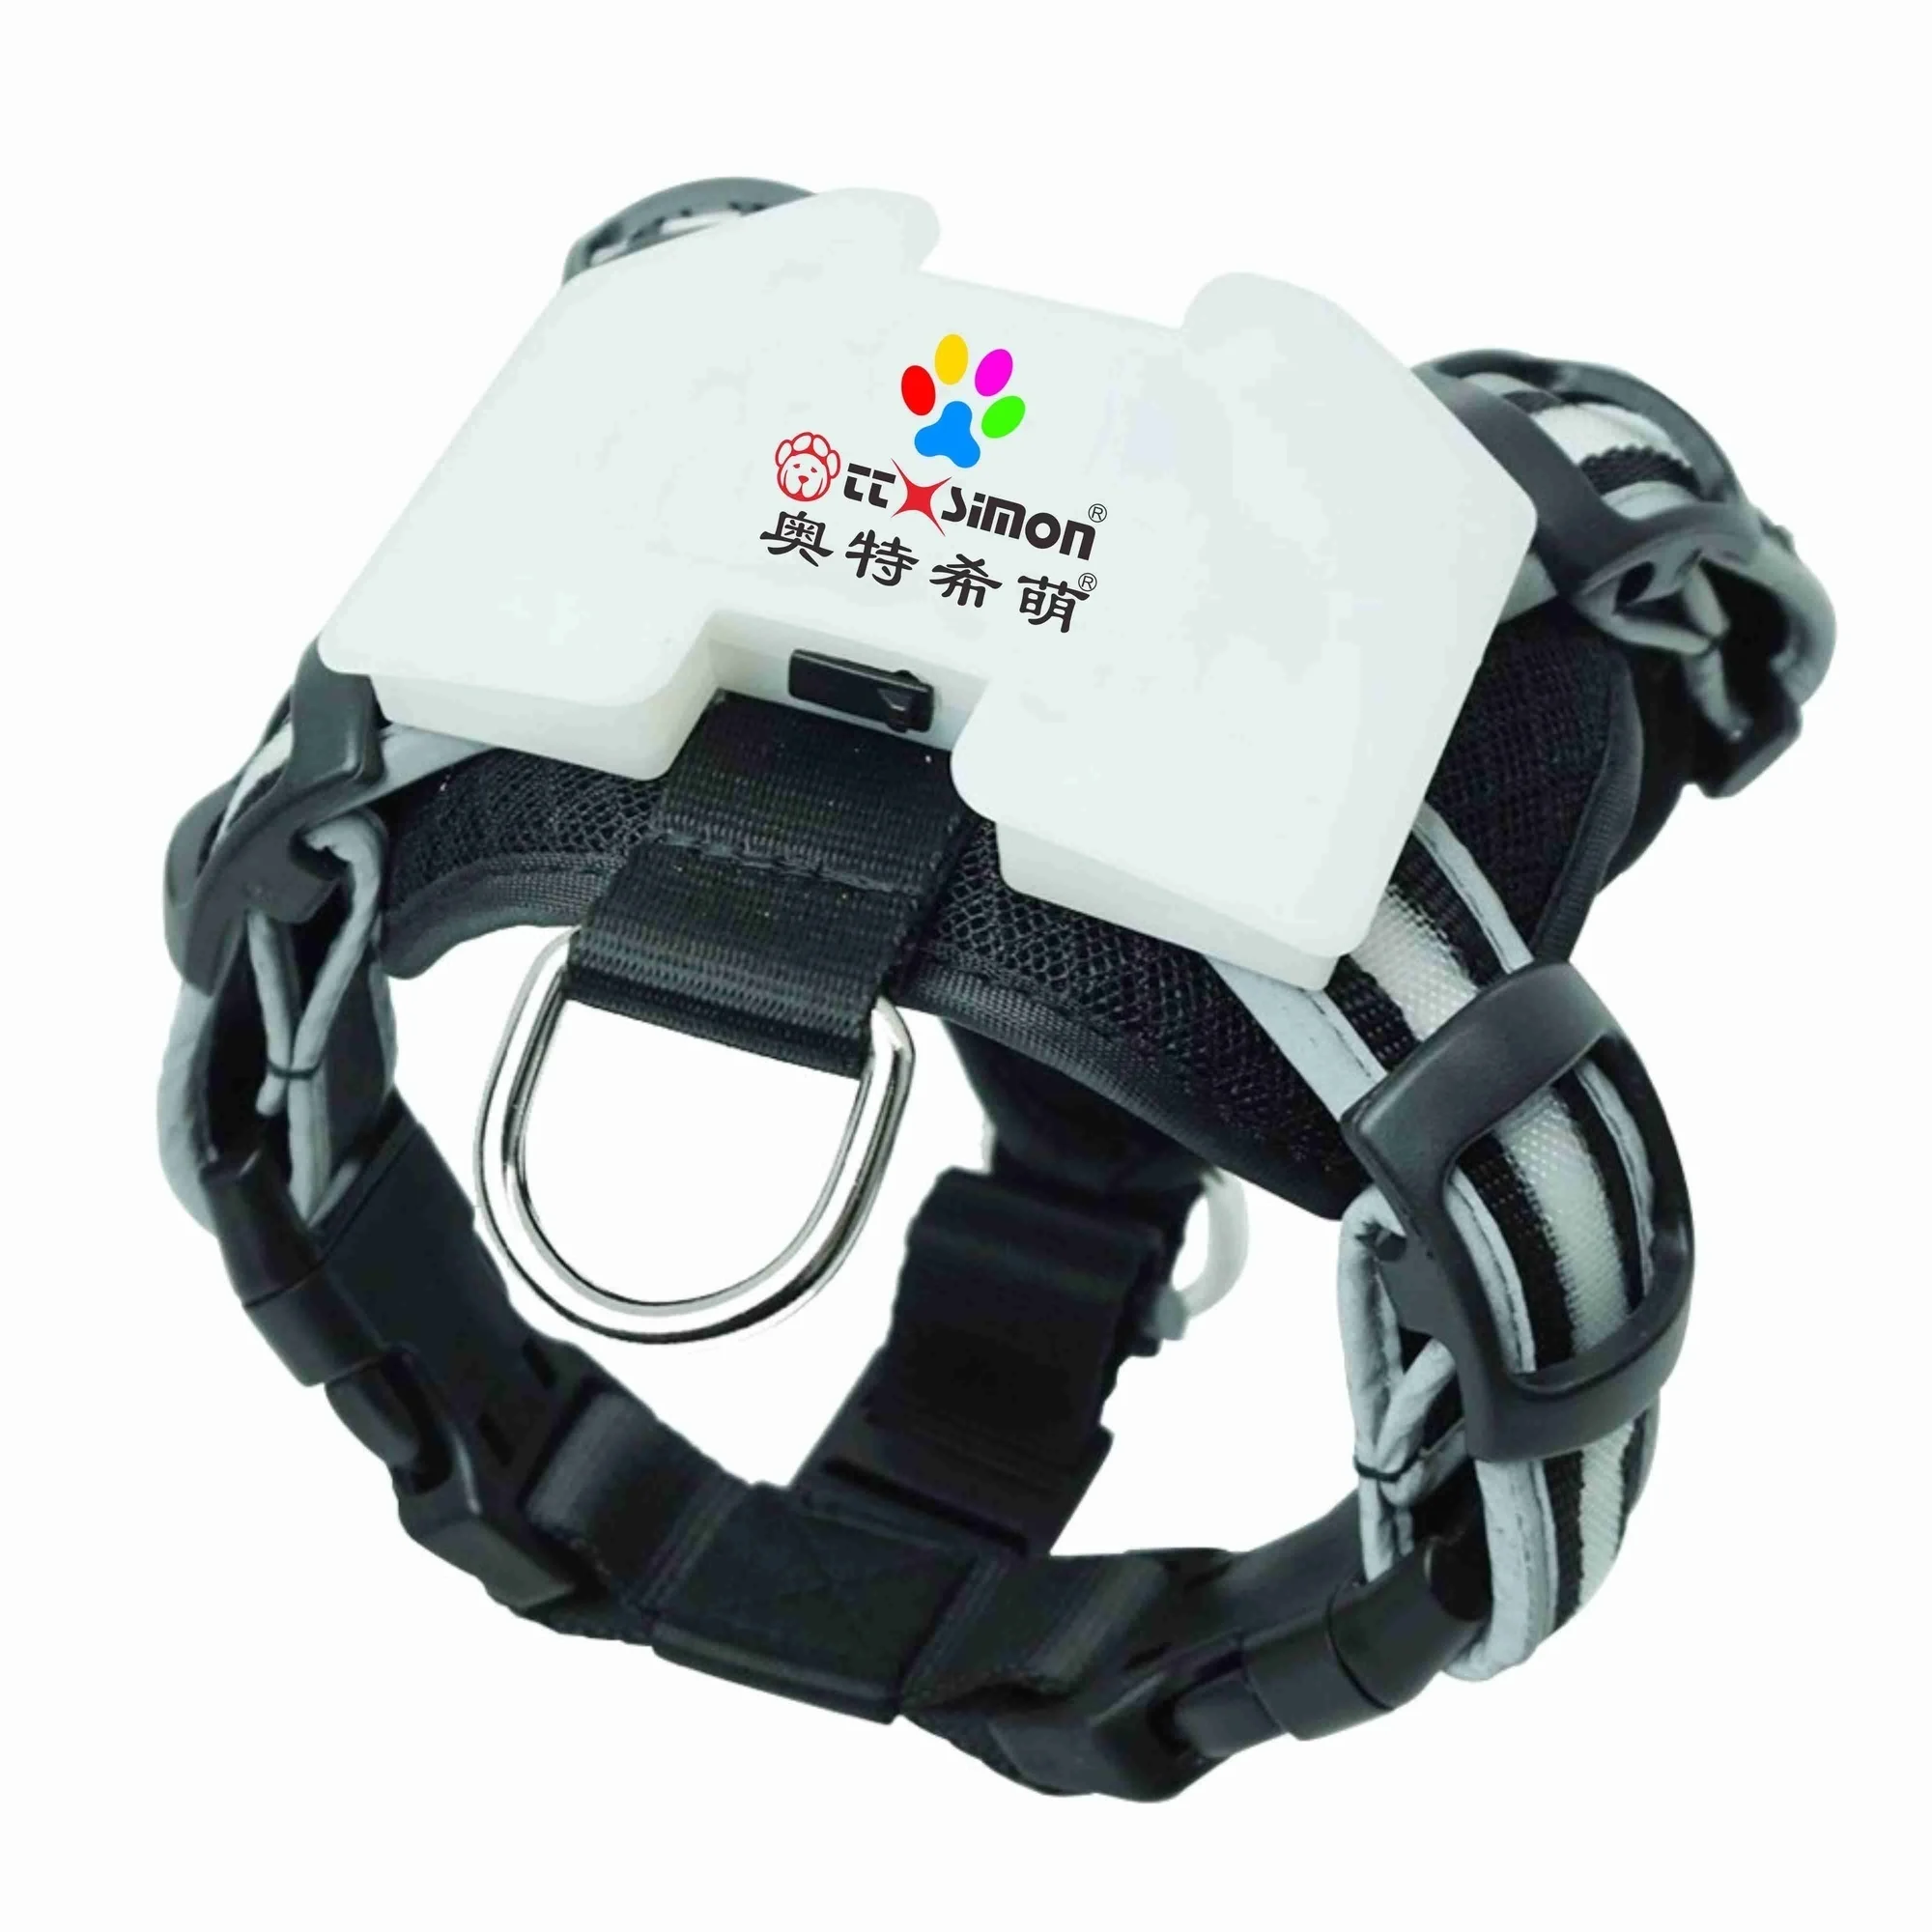 

pets accesories cc simon rechargeable led dog harness for Large Dog trade assurance